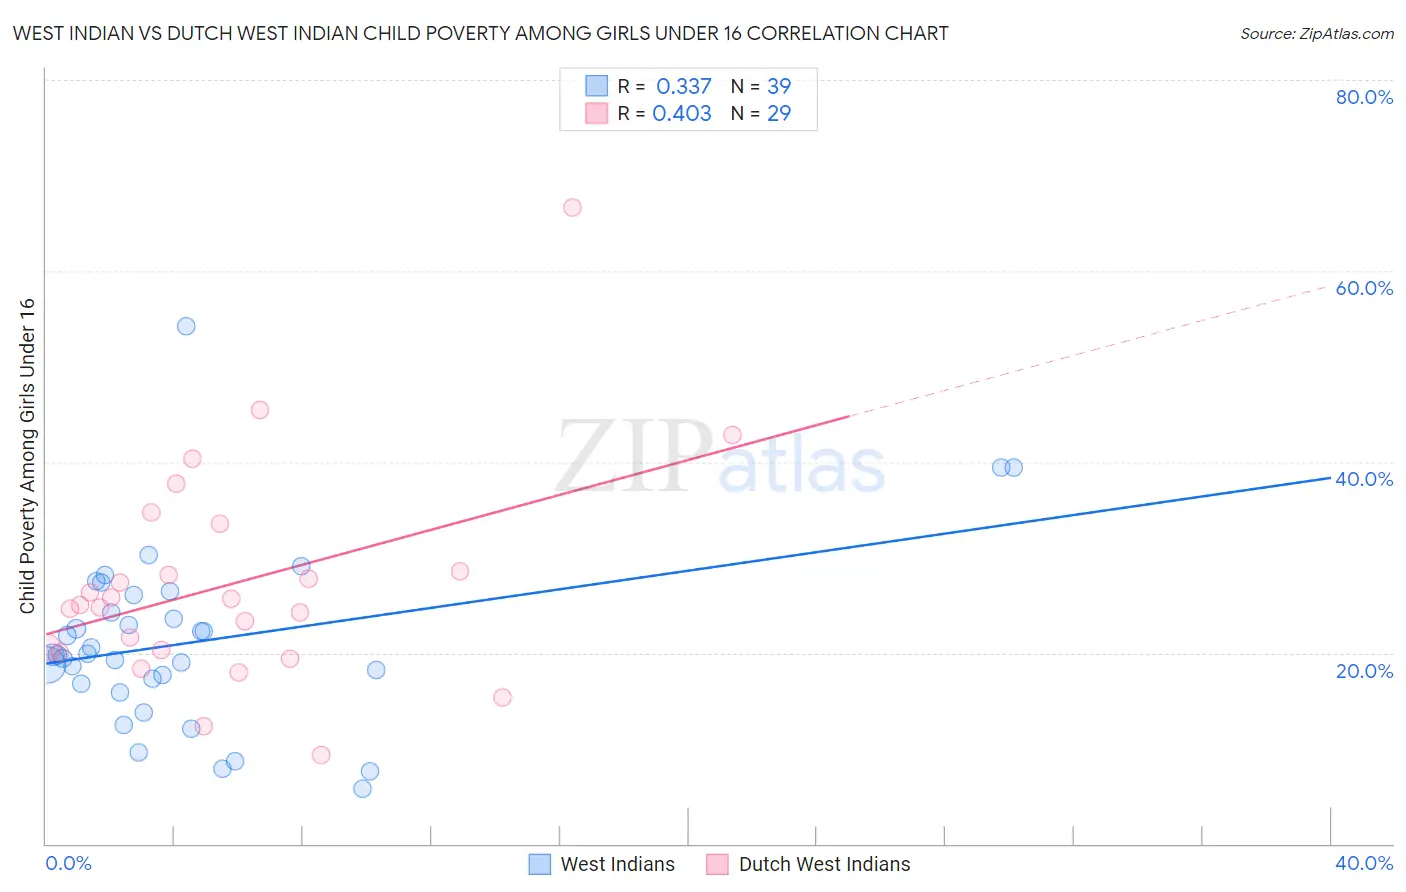 West Indian vs Dutch West Indian Child Poverty Among Girls Under 16